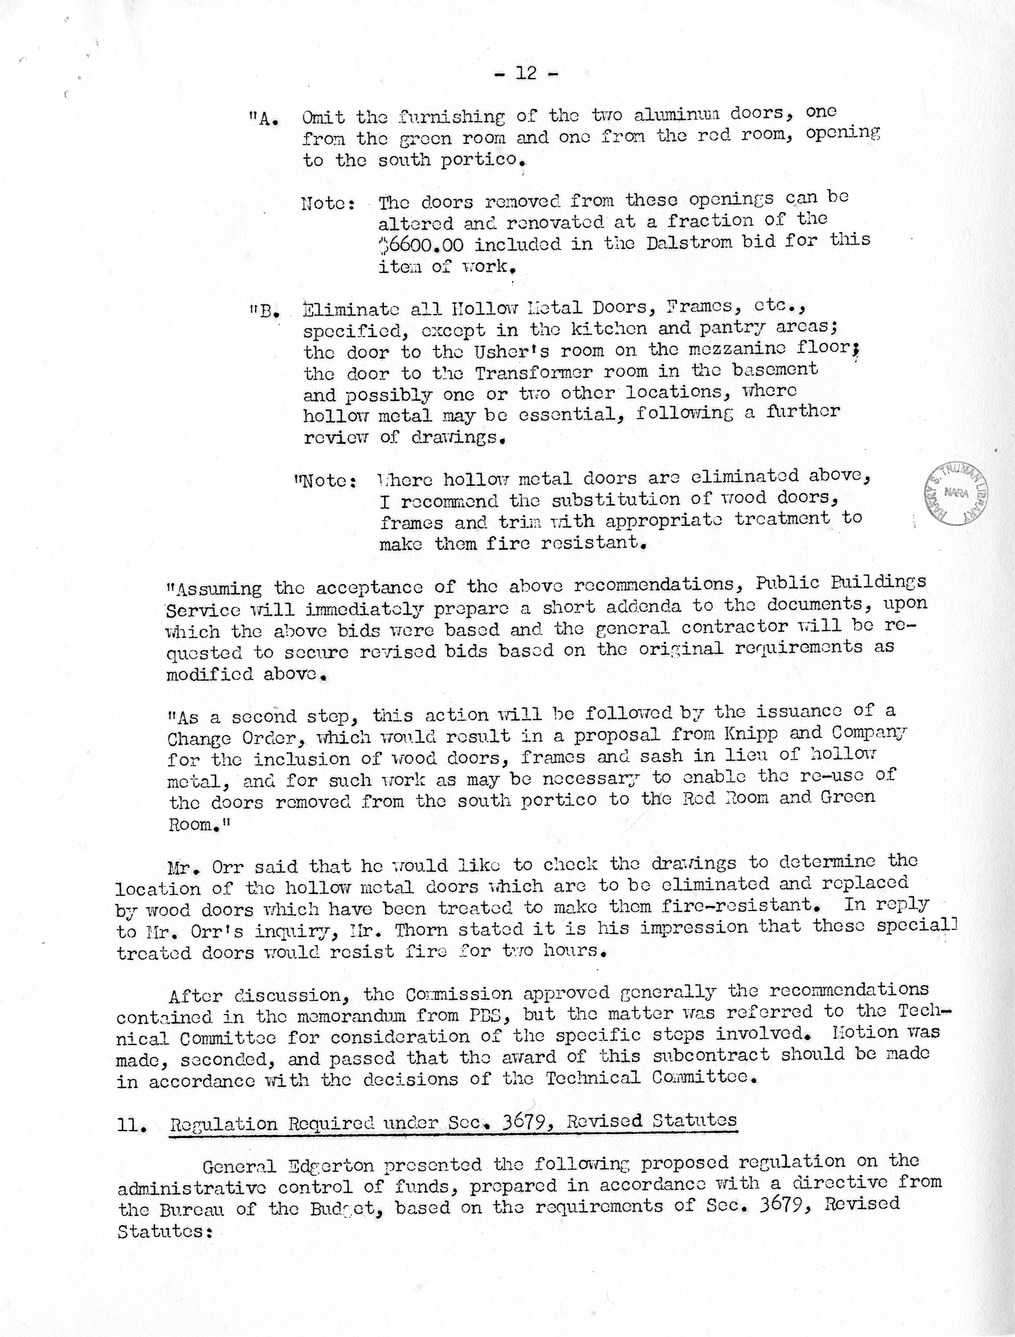 Minutes of the Forty-First Meeting of the Commission on Renovation of the Executive Mansion